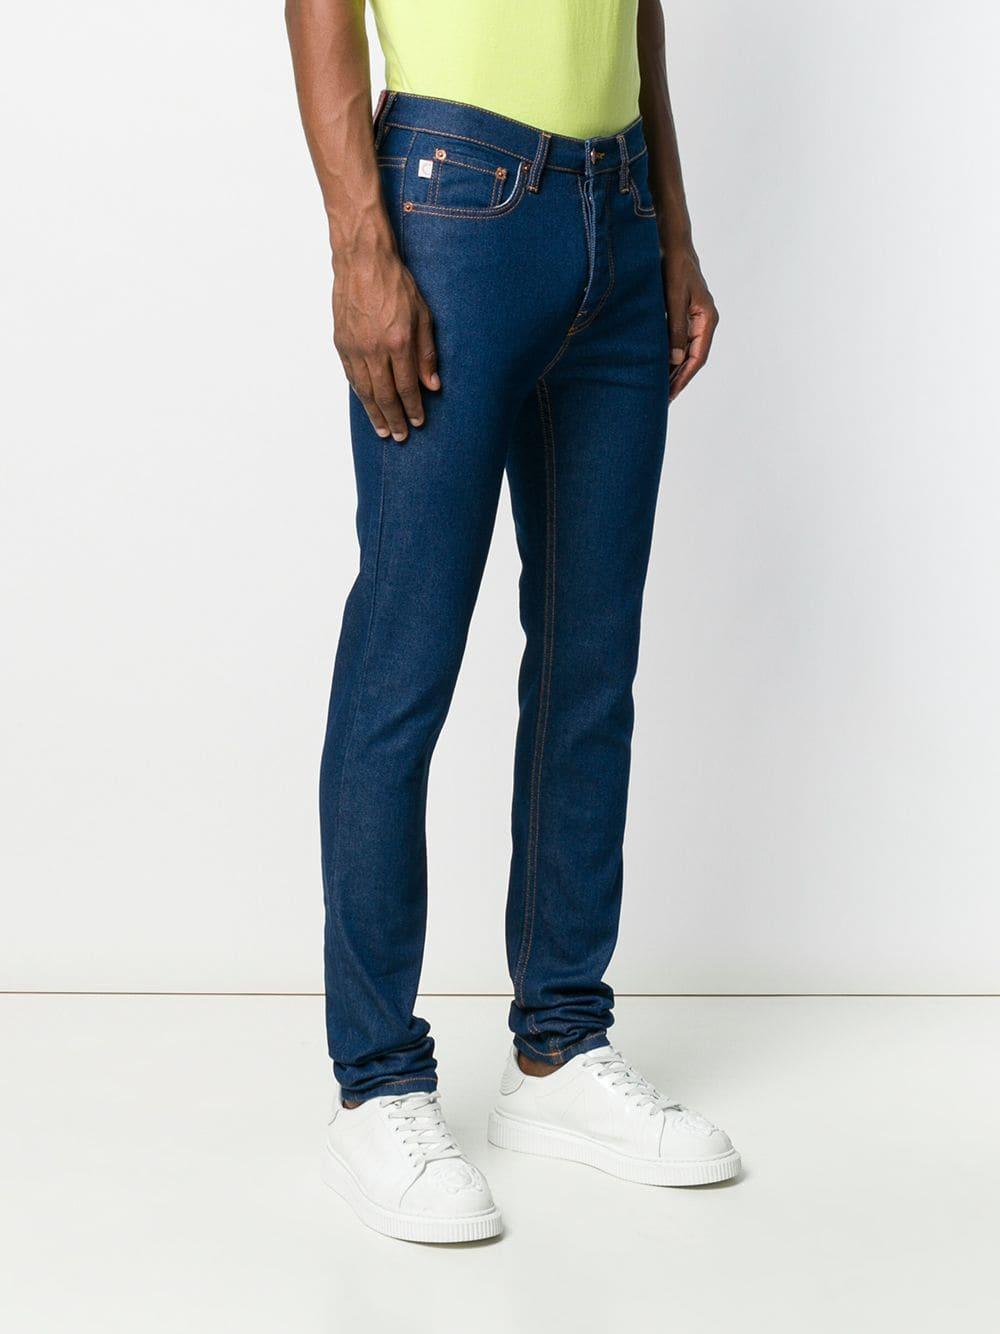 Fiorucci Synthetic Terry Jeans in Blue for Men - Lyst